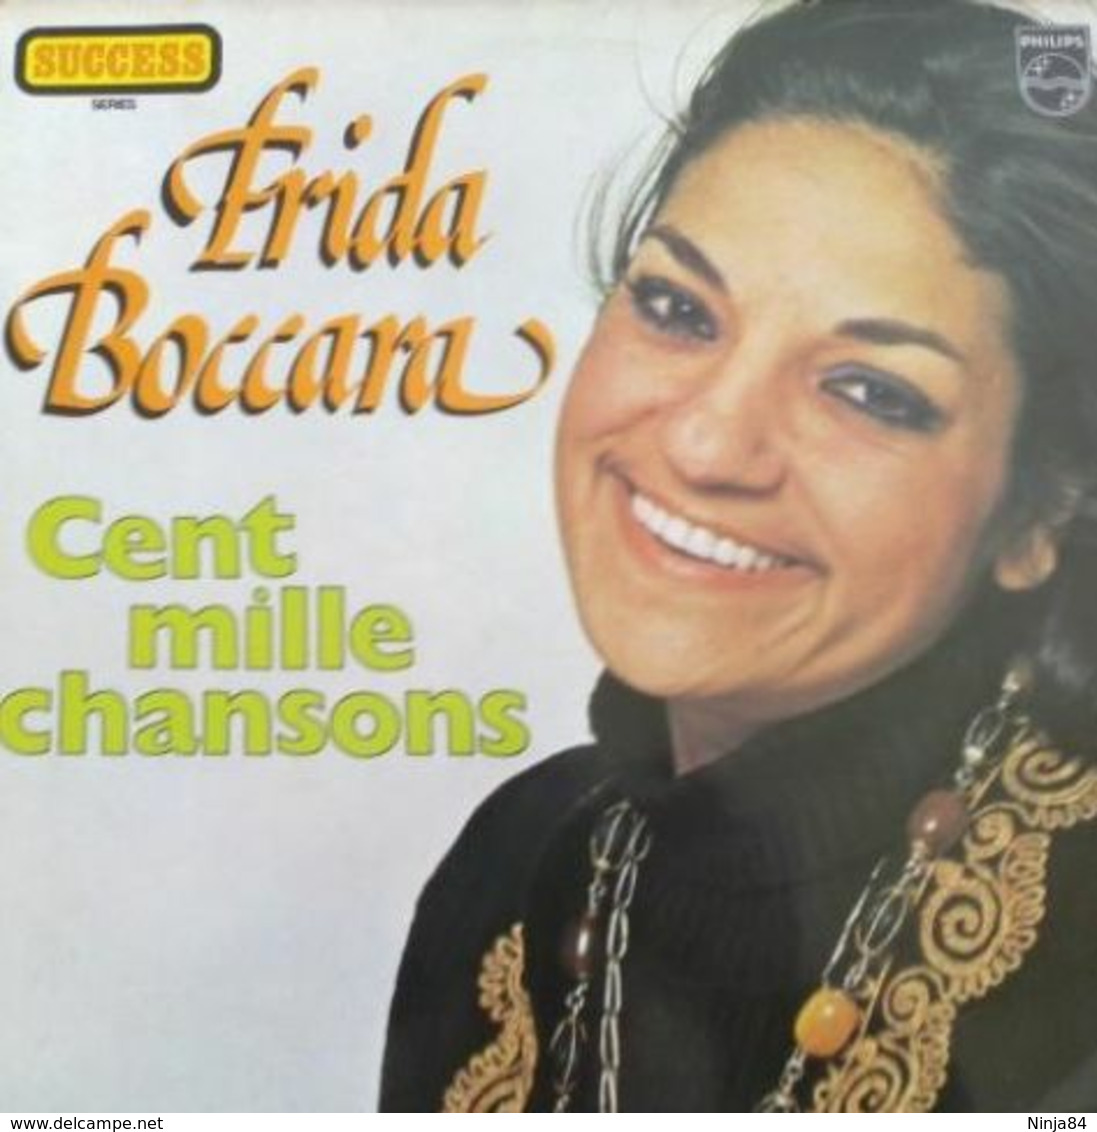 LP 33 RPM (12")  Frida Boccara  "  Cent Mille Chansons  "  Hollande - Other - French Music